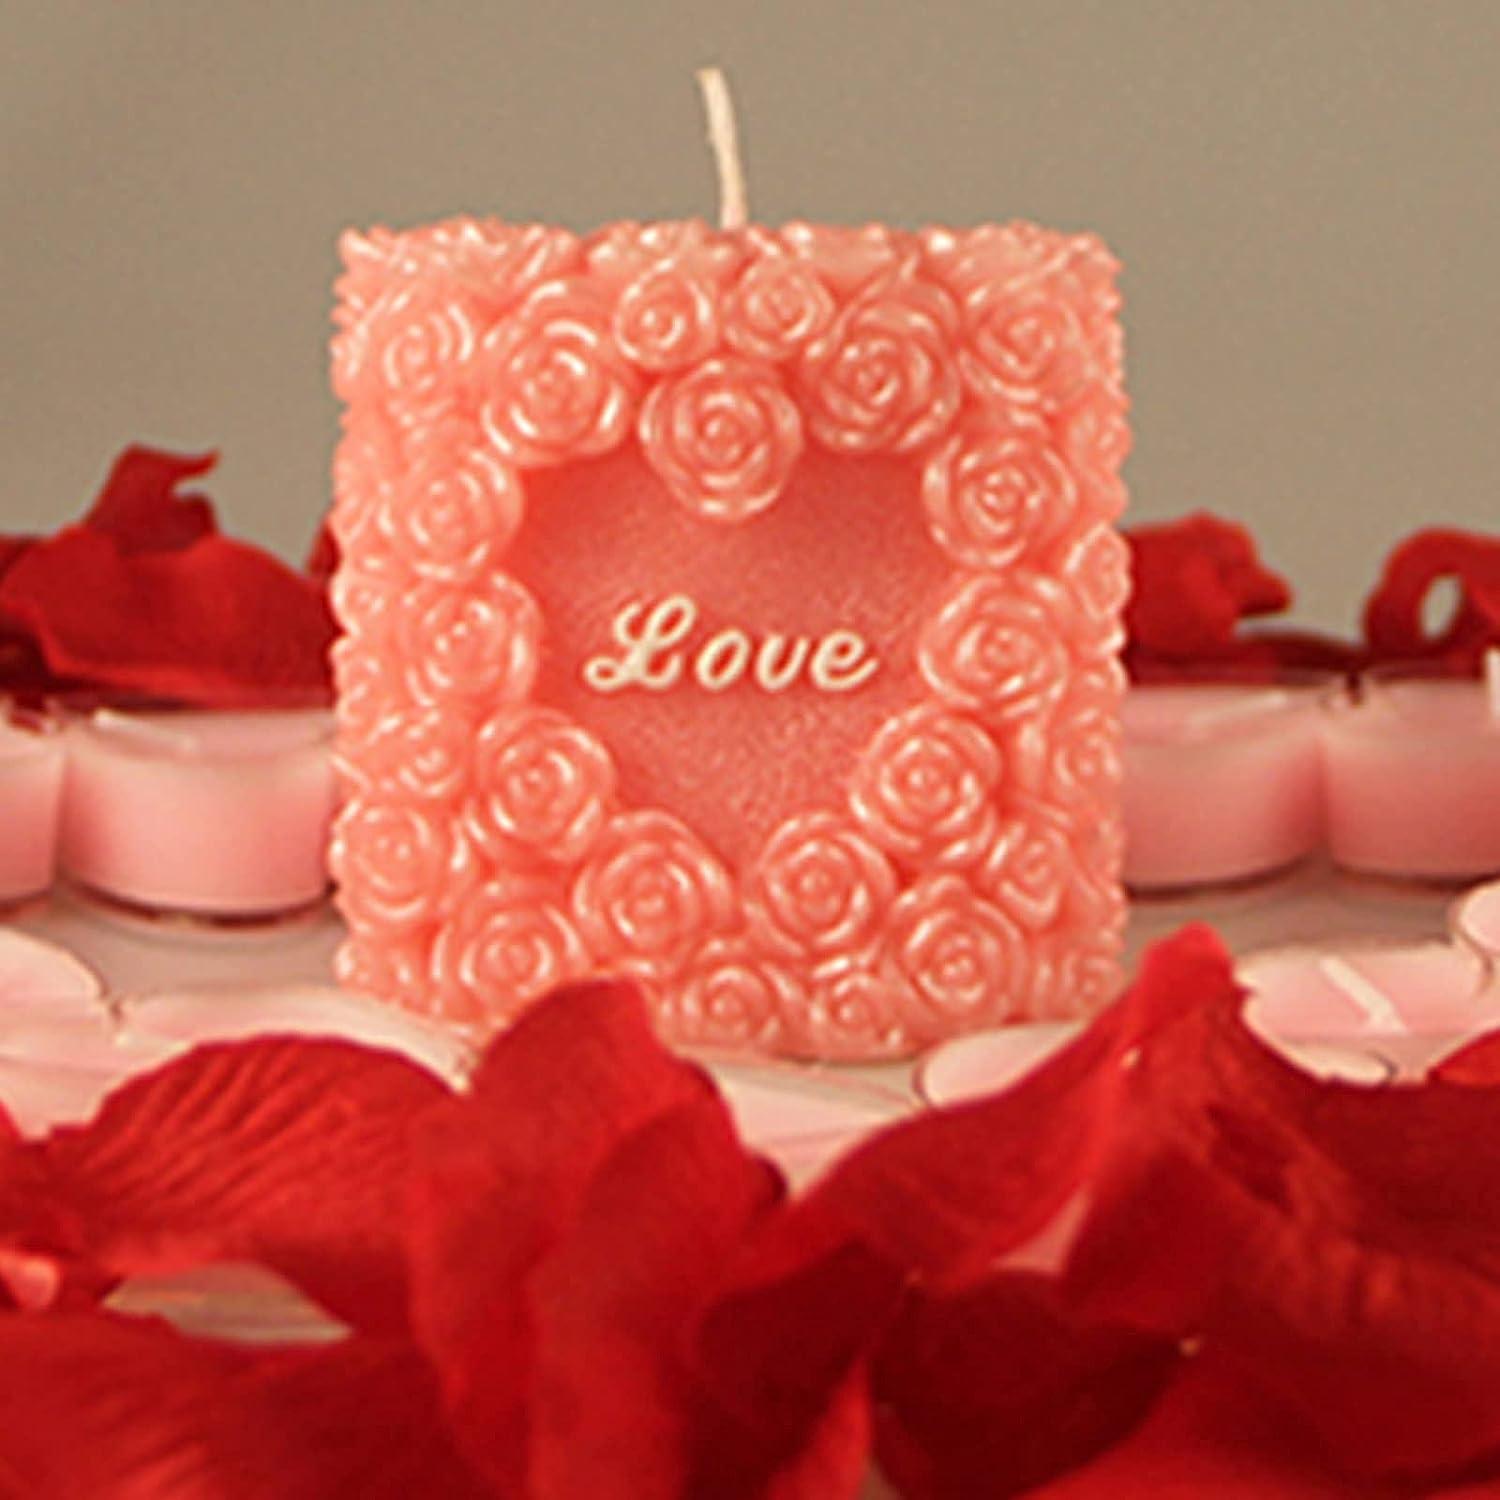 Valentine's Theme Candle Silicone Molds Heart Rose LOVE Pattern Moulds  Handmade Fragrance Gypsum Resin Soap Cake Making Mold